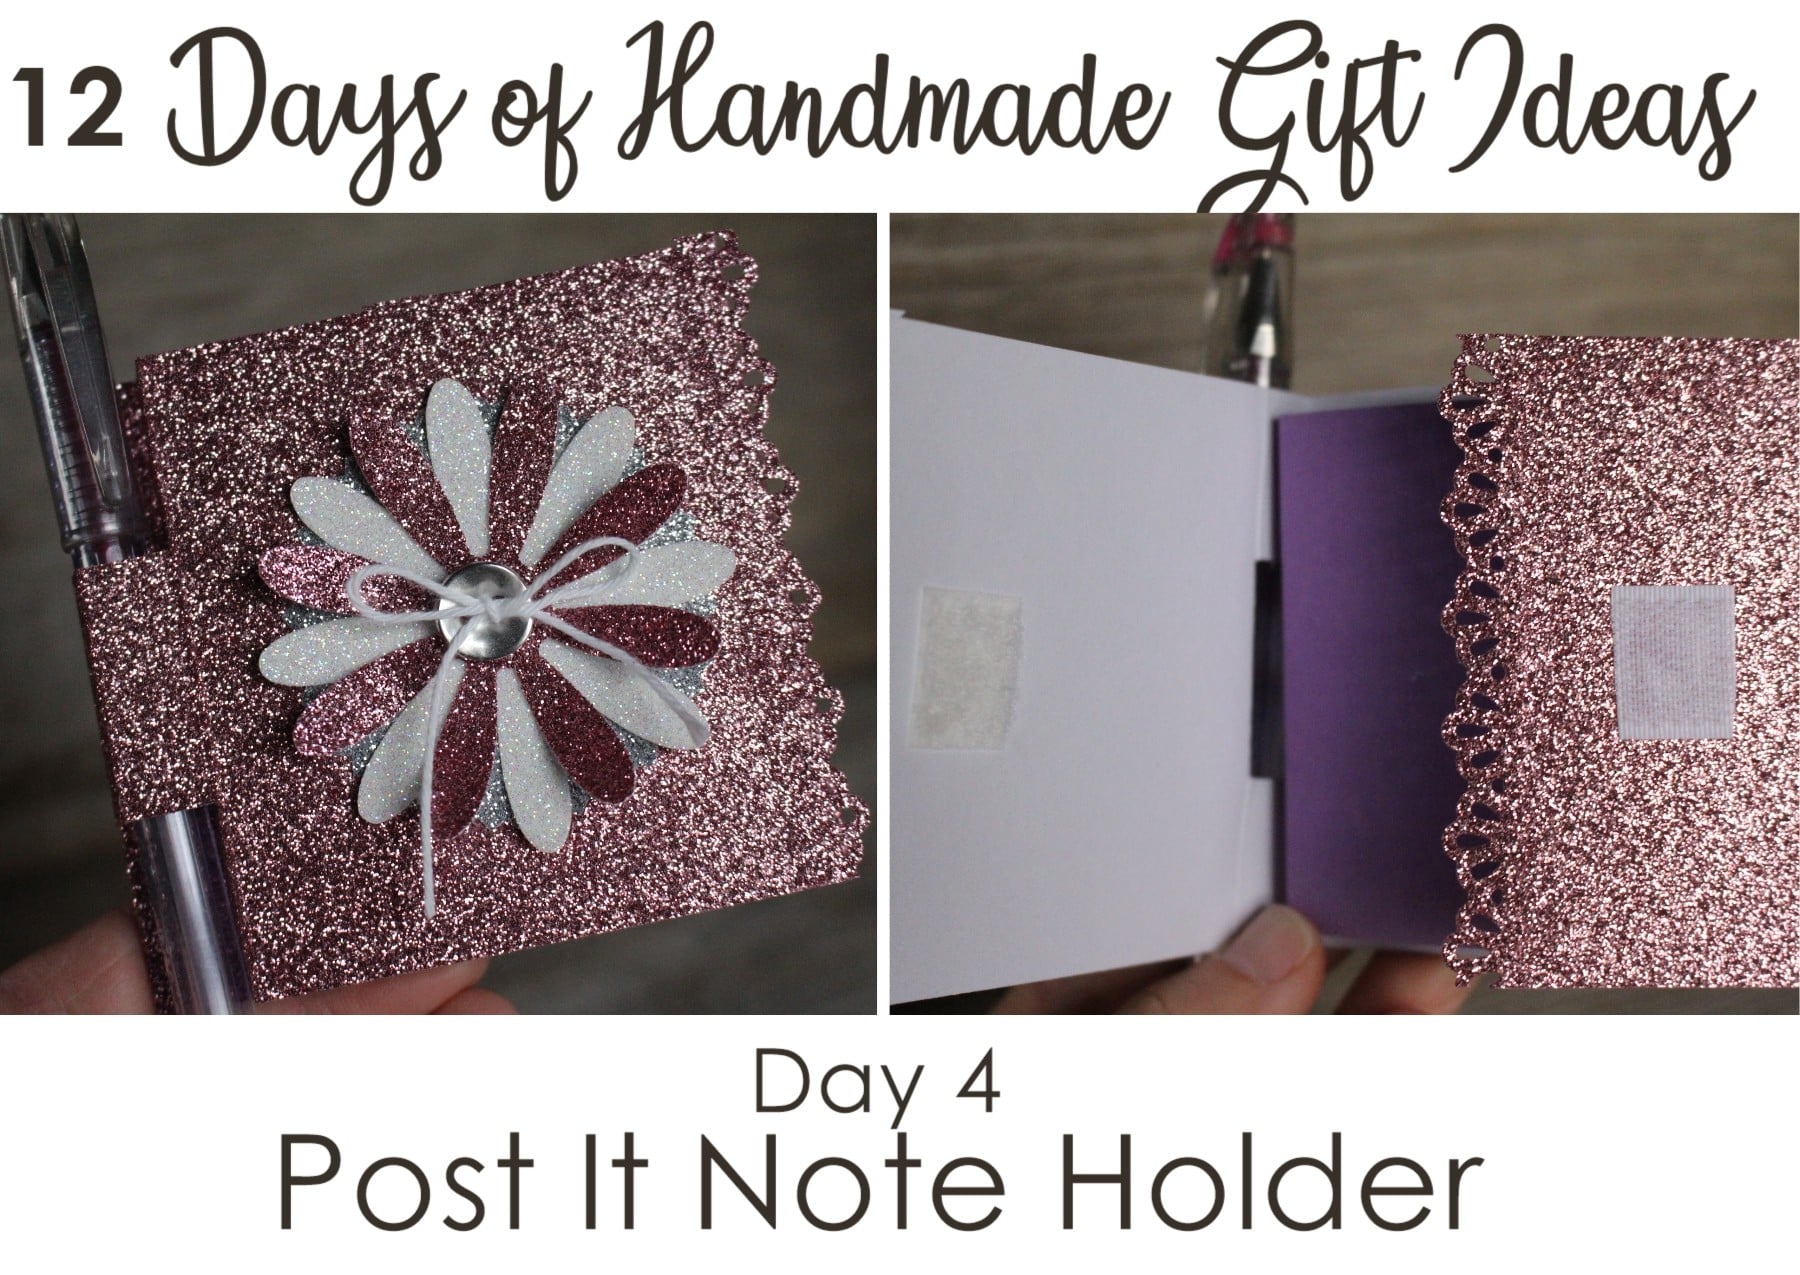 Pen and post-it holder decorated notebook - a quick, easy and inexpensive handmade gift idea - Stampin' Up!